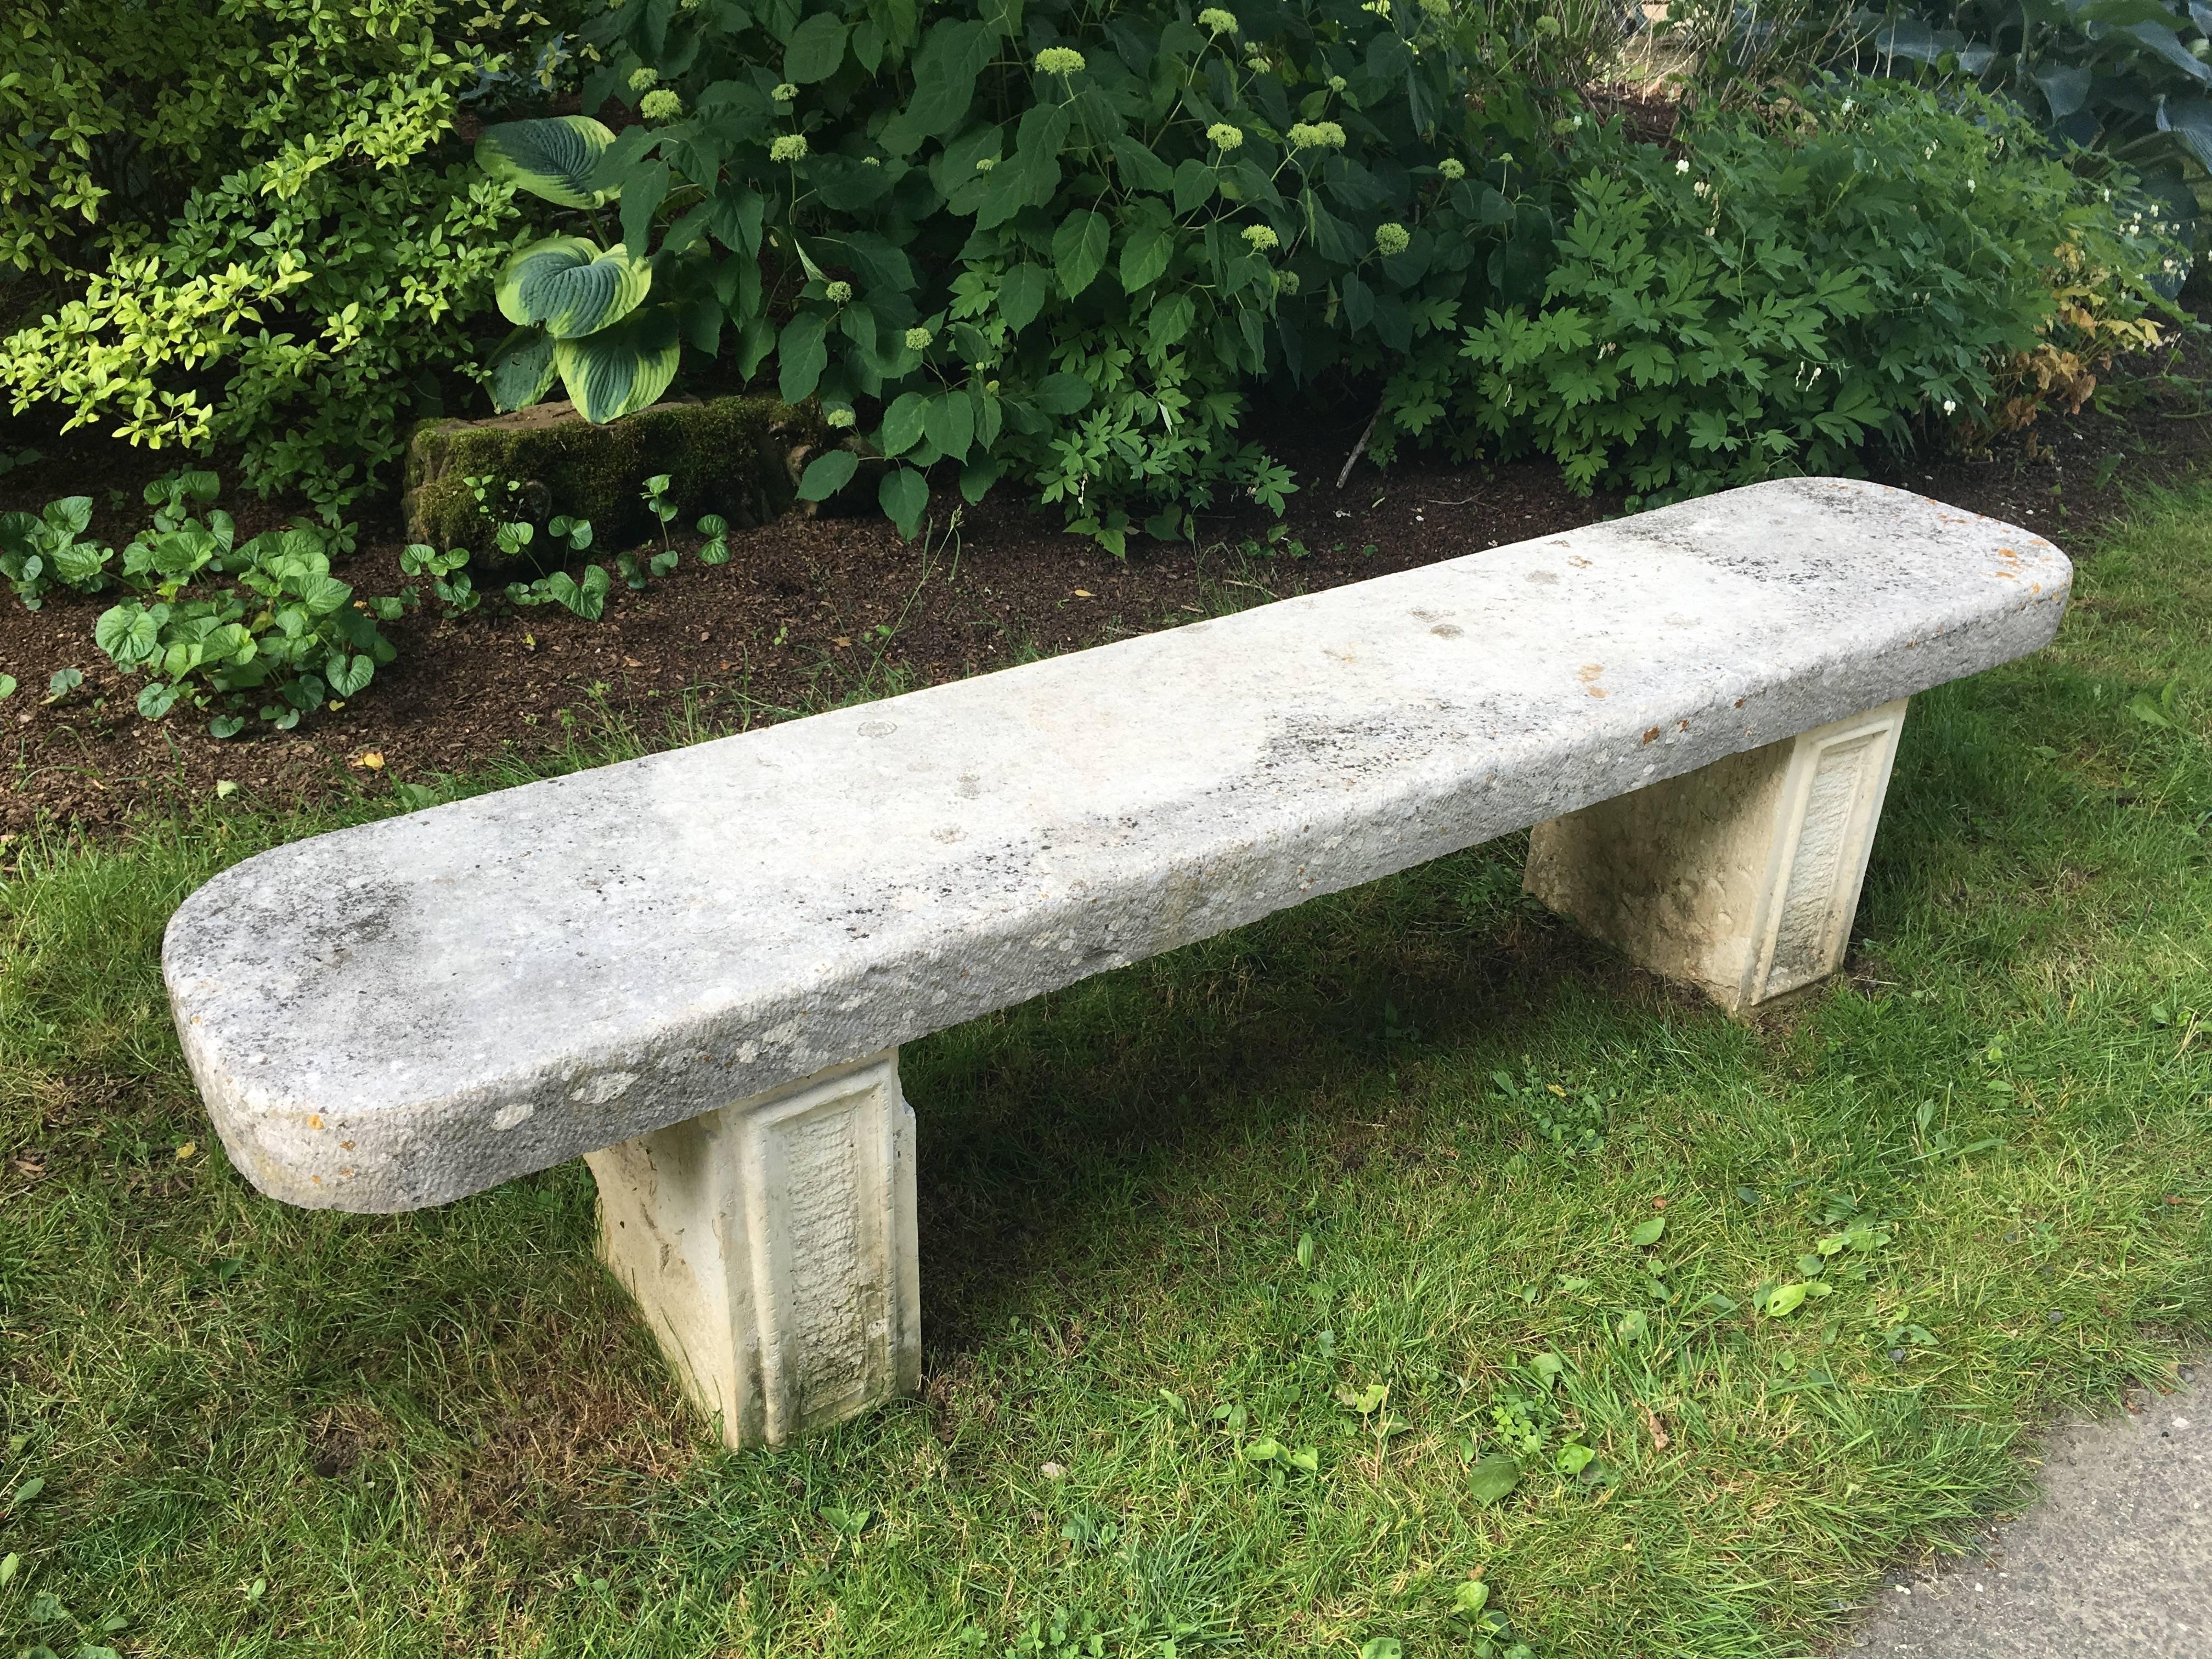 What a beauty! Hand-carved from limestone and with lovely rounded edges on the seat, this garden bench has a nicely-weathered surface and is in very good antique condition. The two supports have rectangular incised detail that are